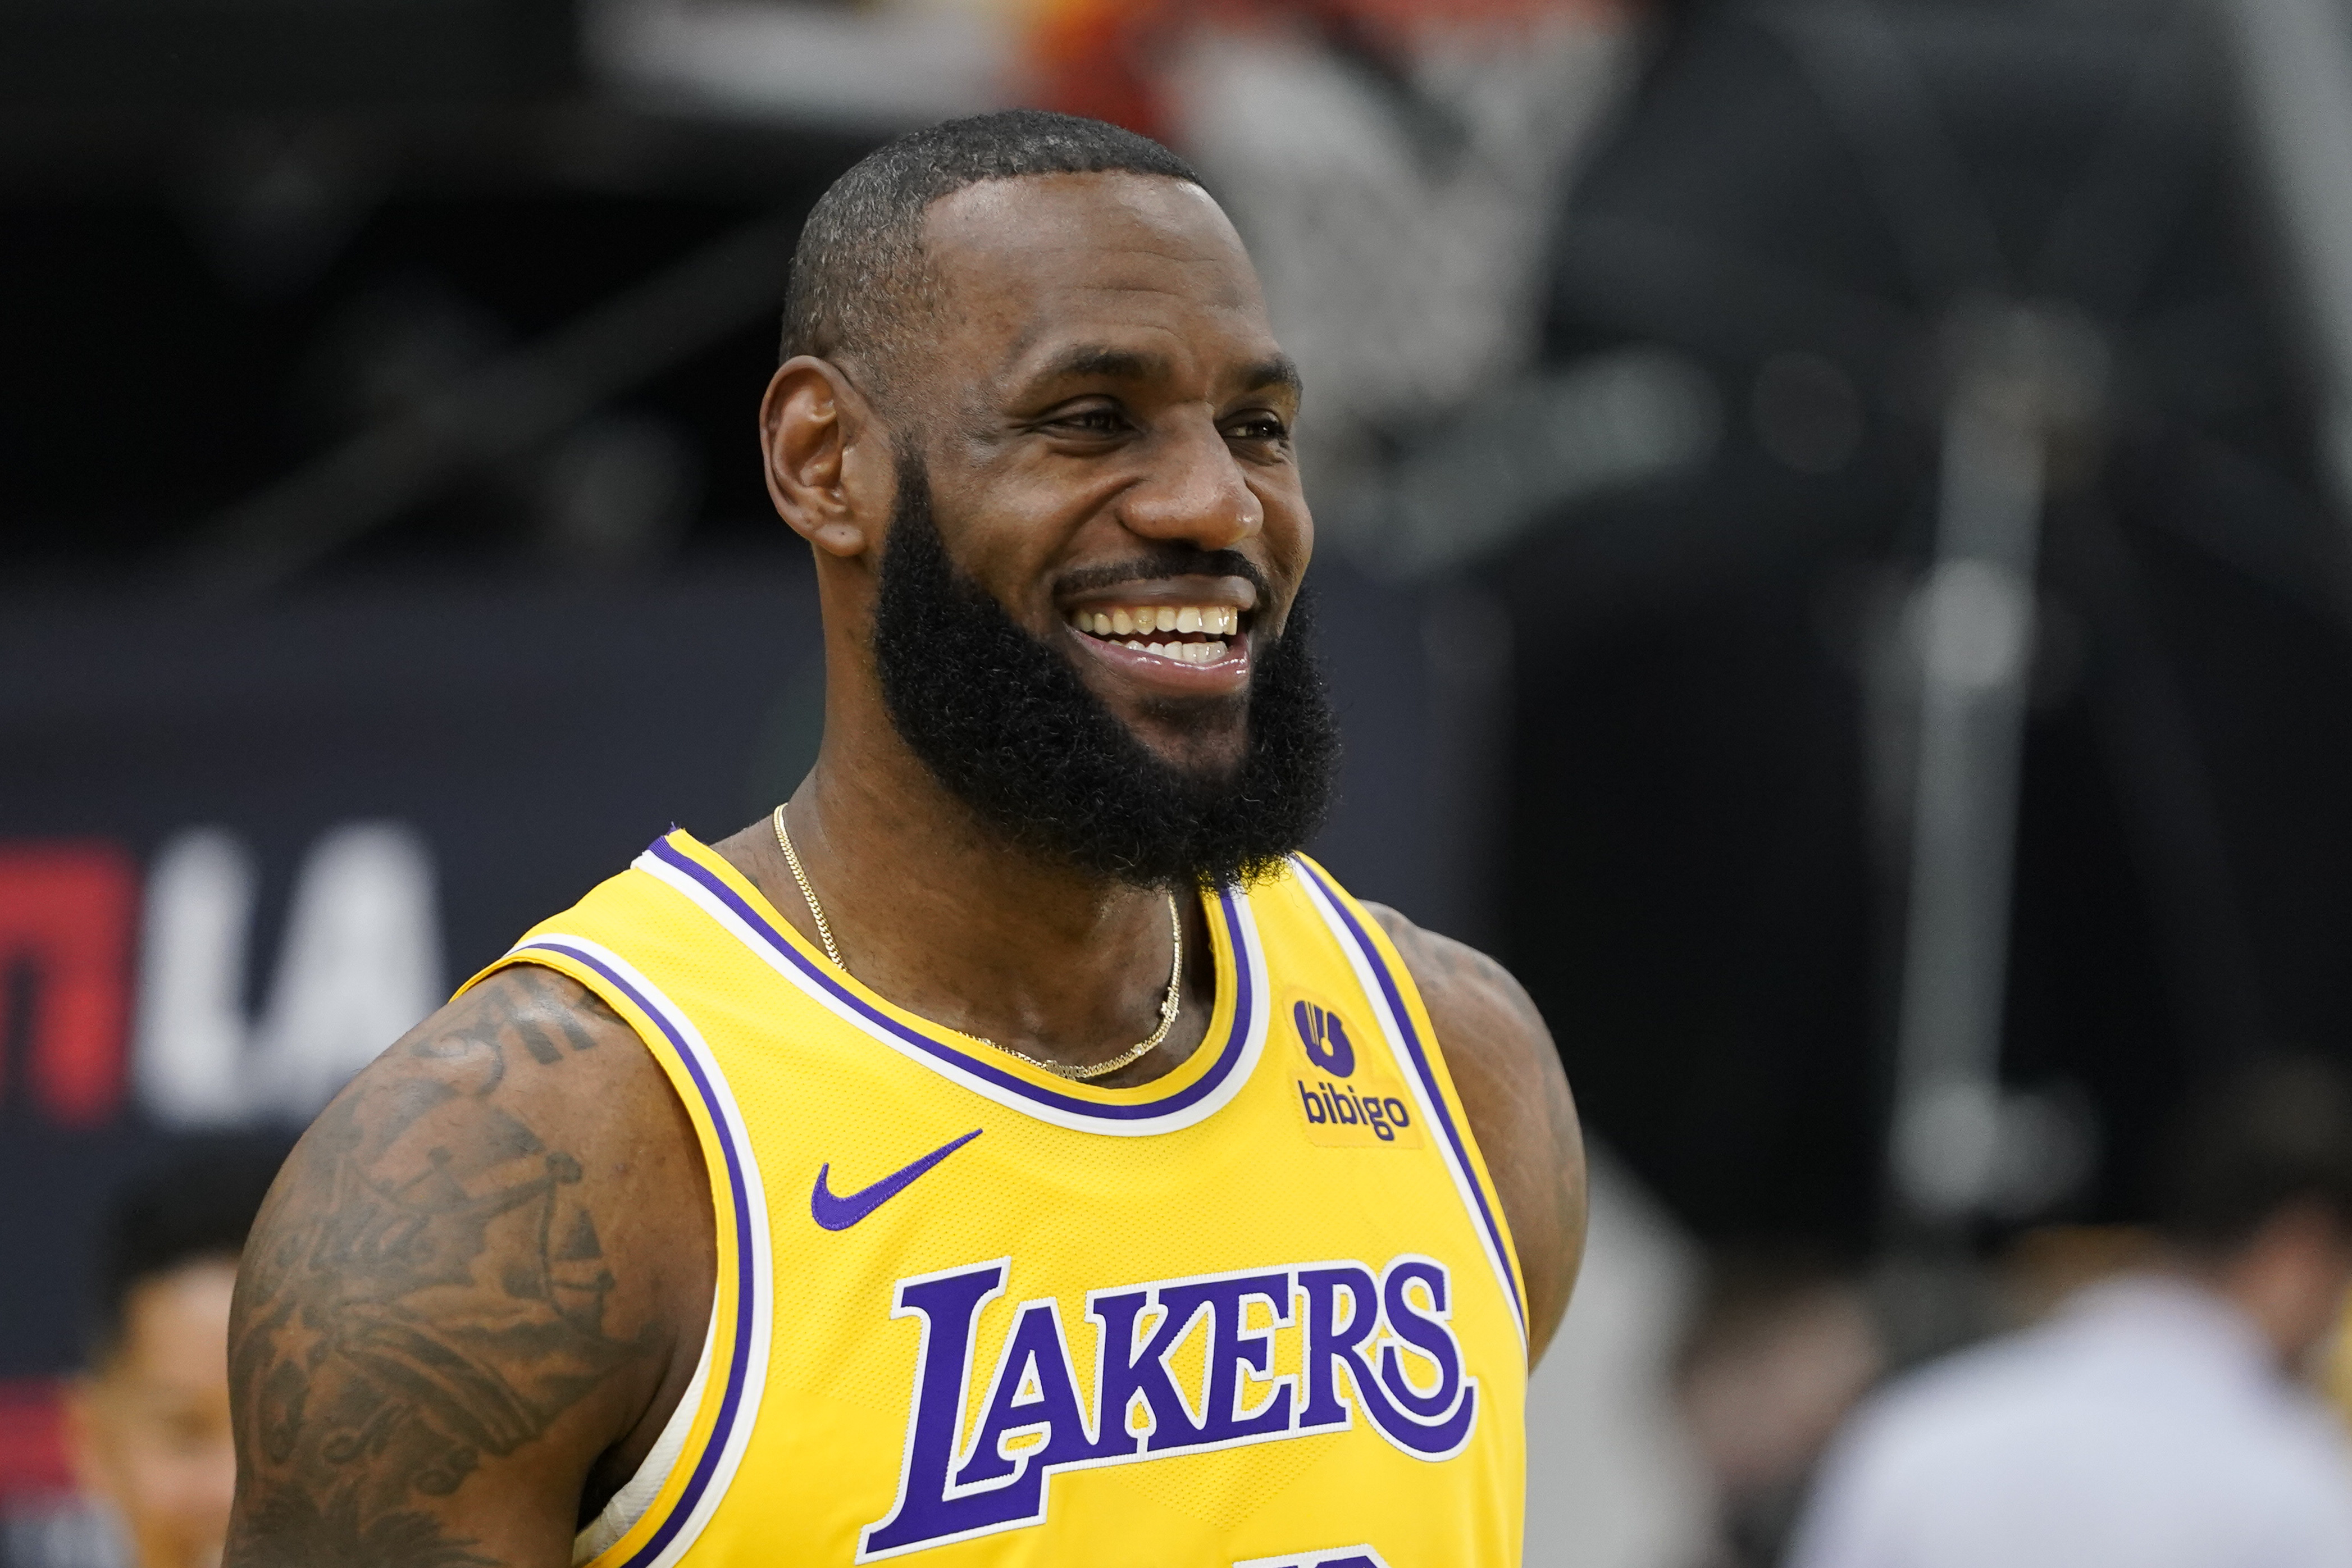 Lakers' LeBron James is redefining NBA longevity as he reaches his